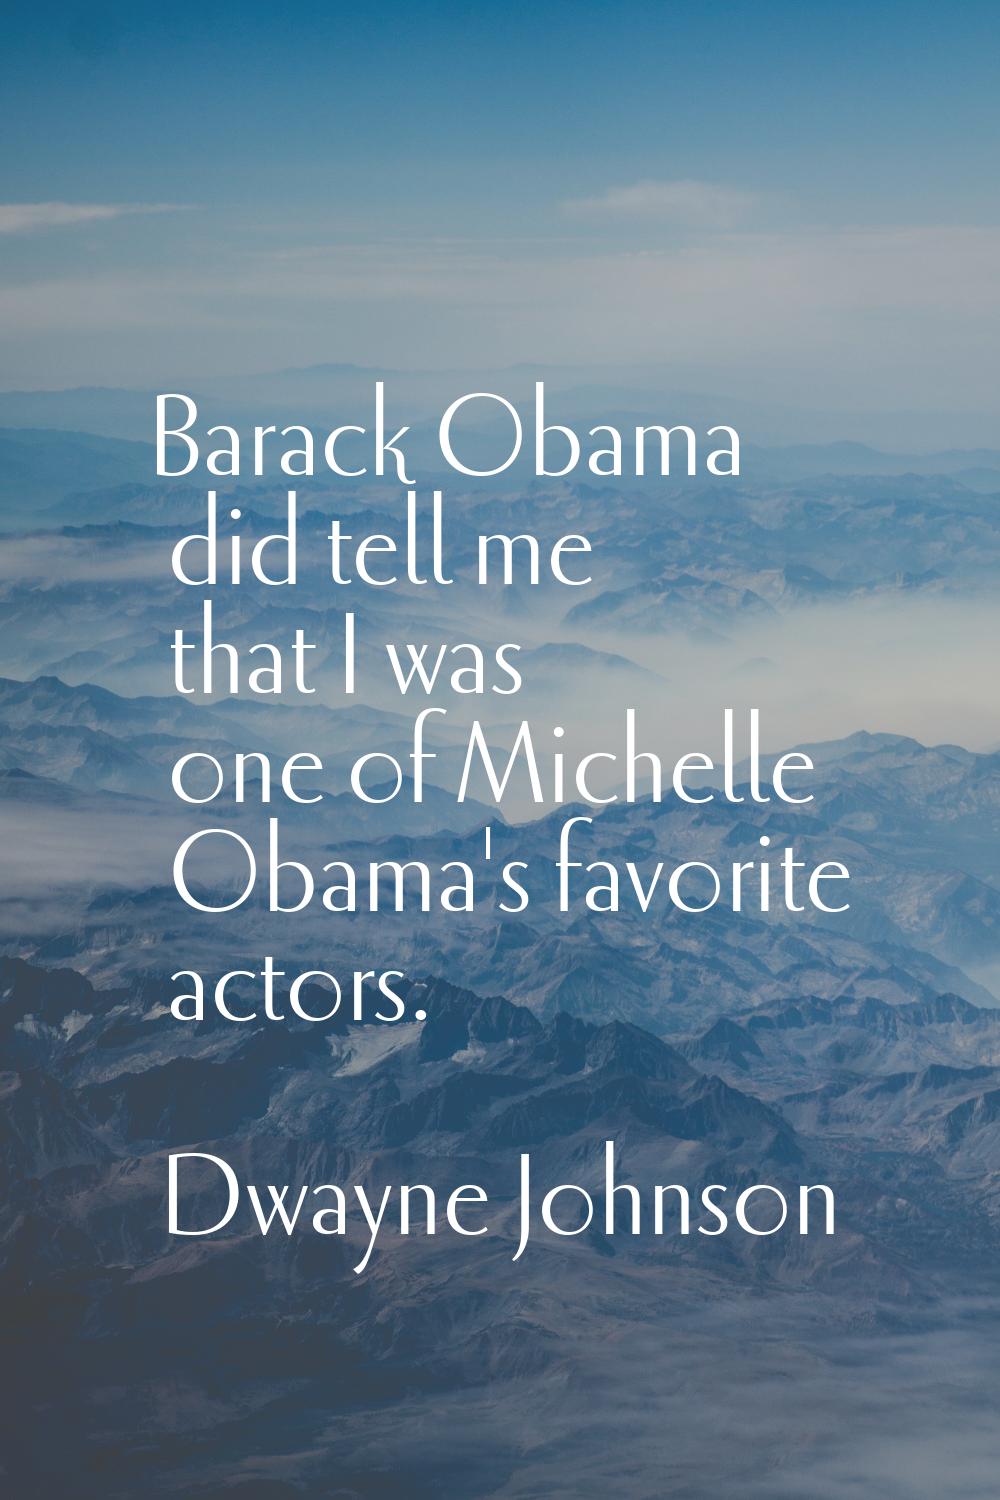 Barack Obama did tell me that I was one of Michelle Obama's favorite actors.